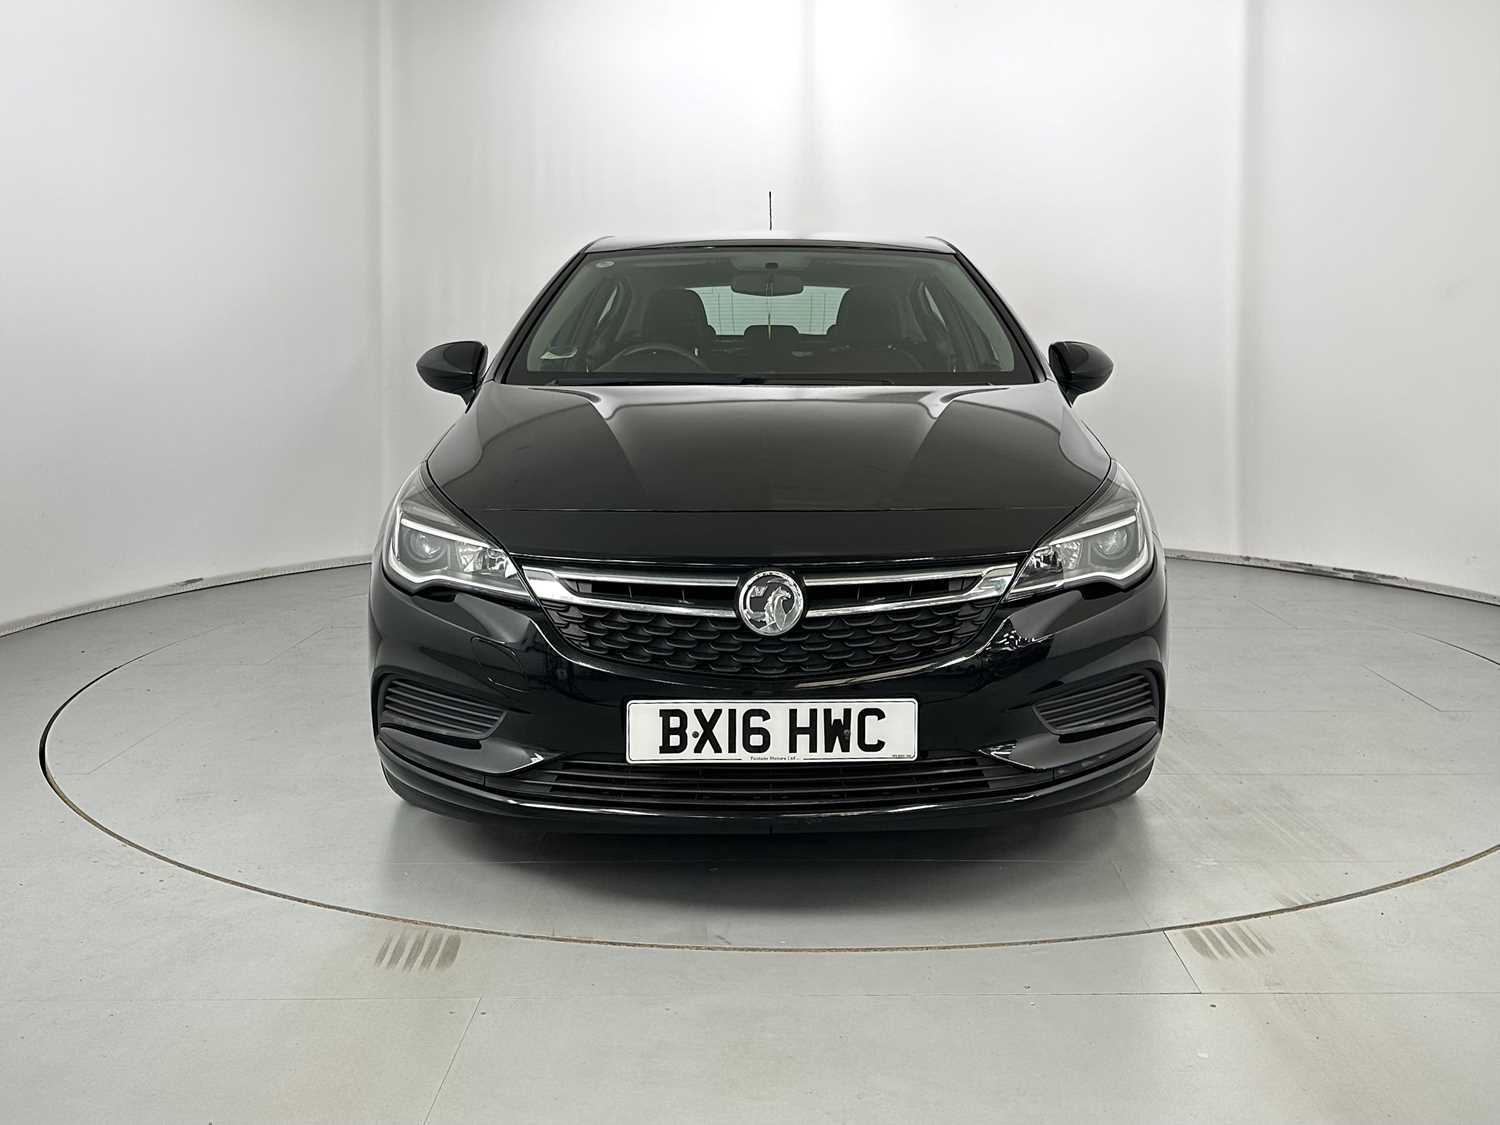 2016 Vauxhall Astra - Image 2 of 34